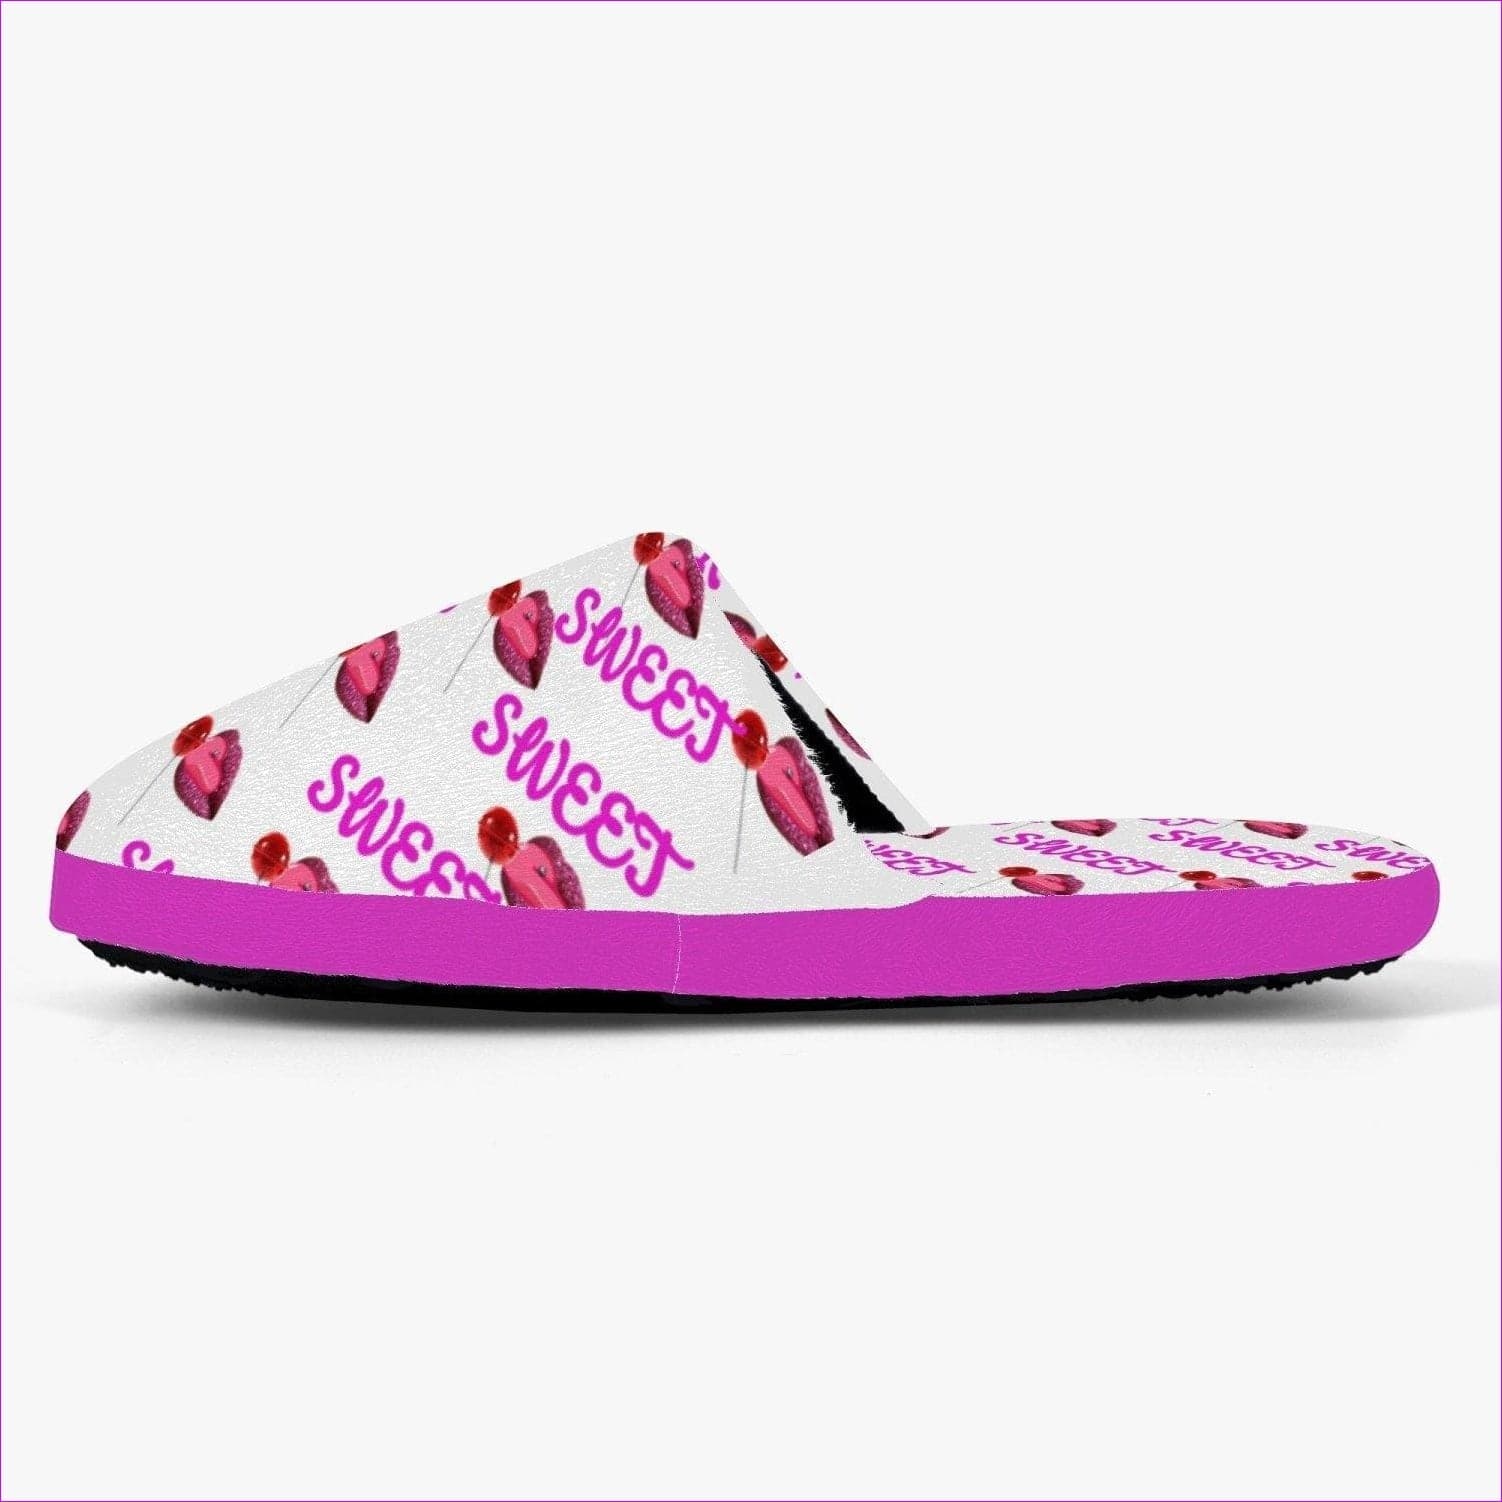 Sweet Clothing Classic Cotton Slippers - women's slippers at TFC&H Co.